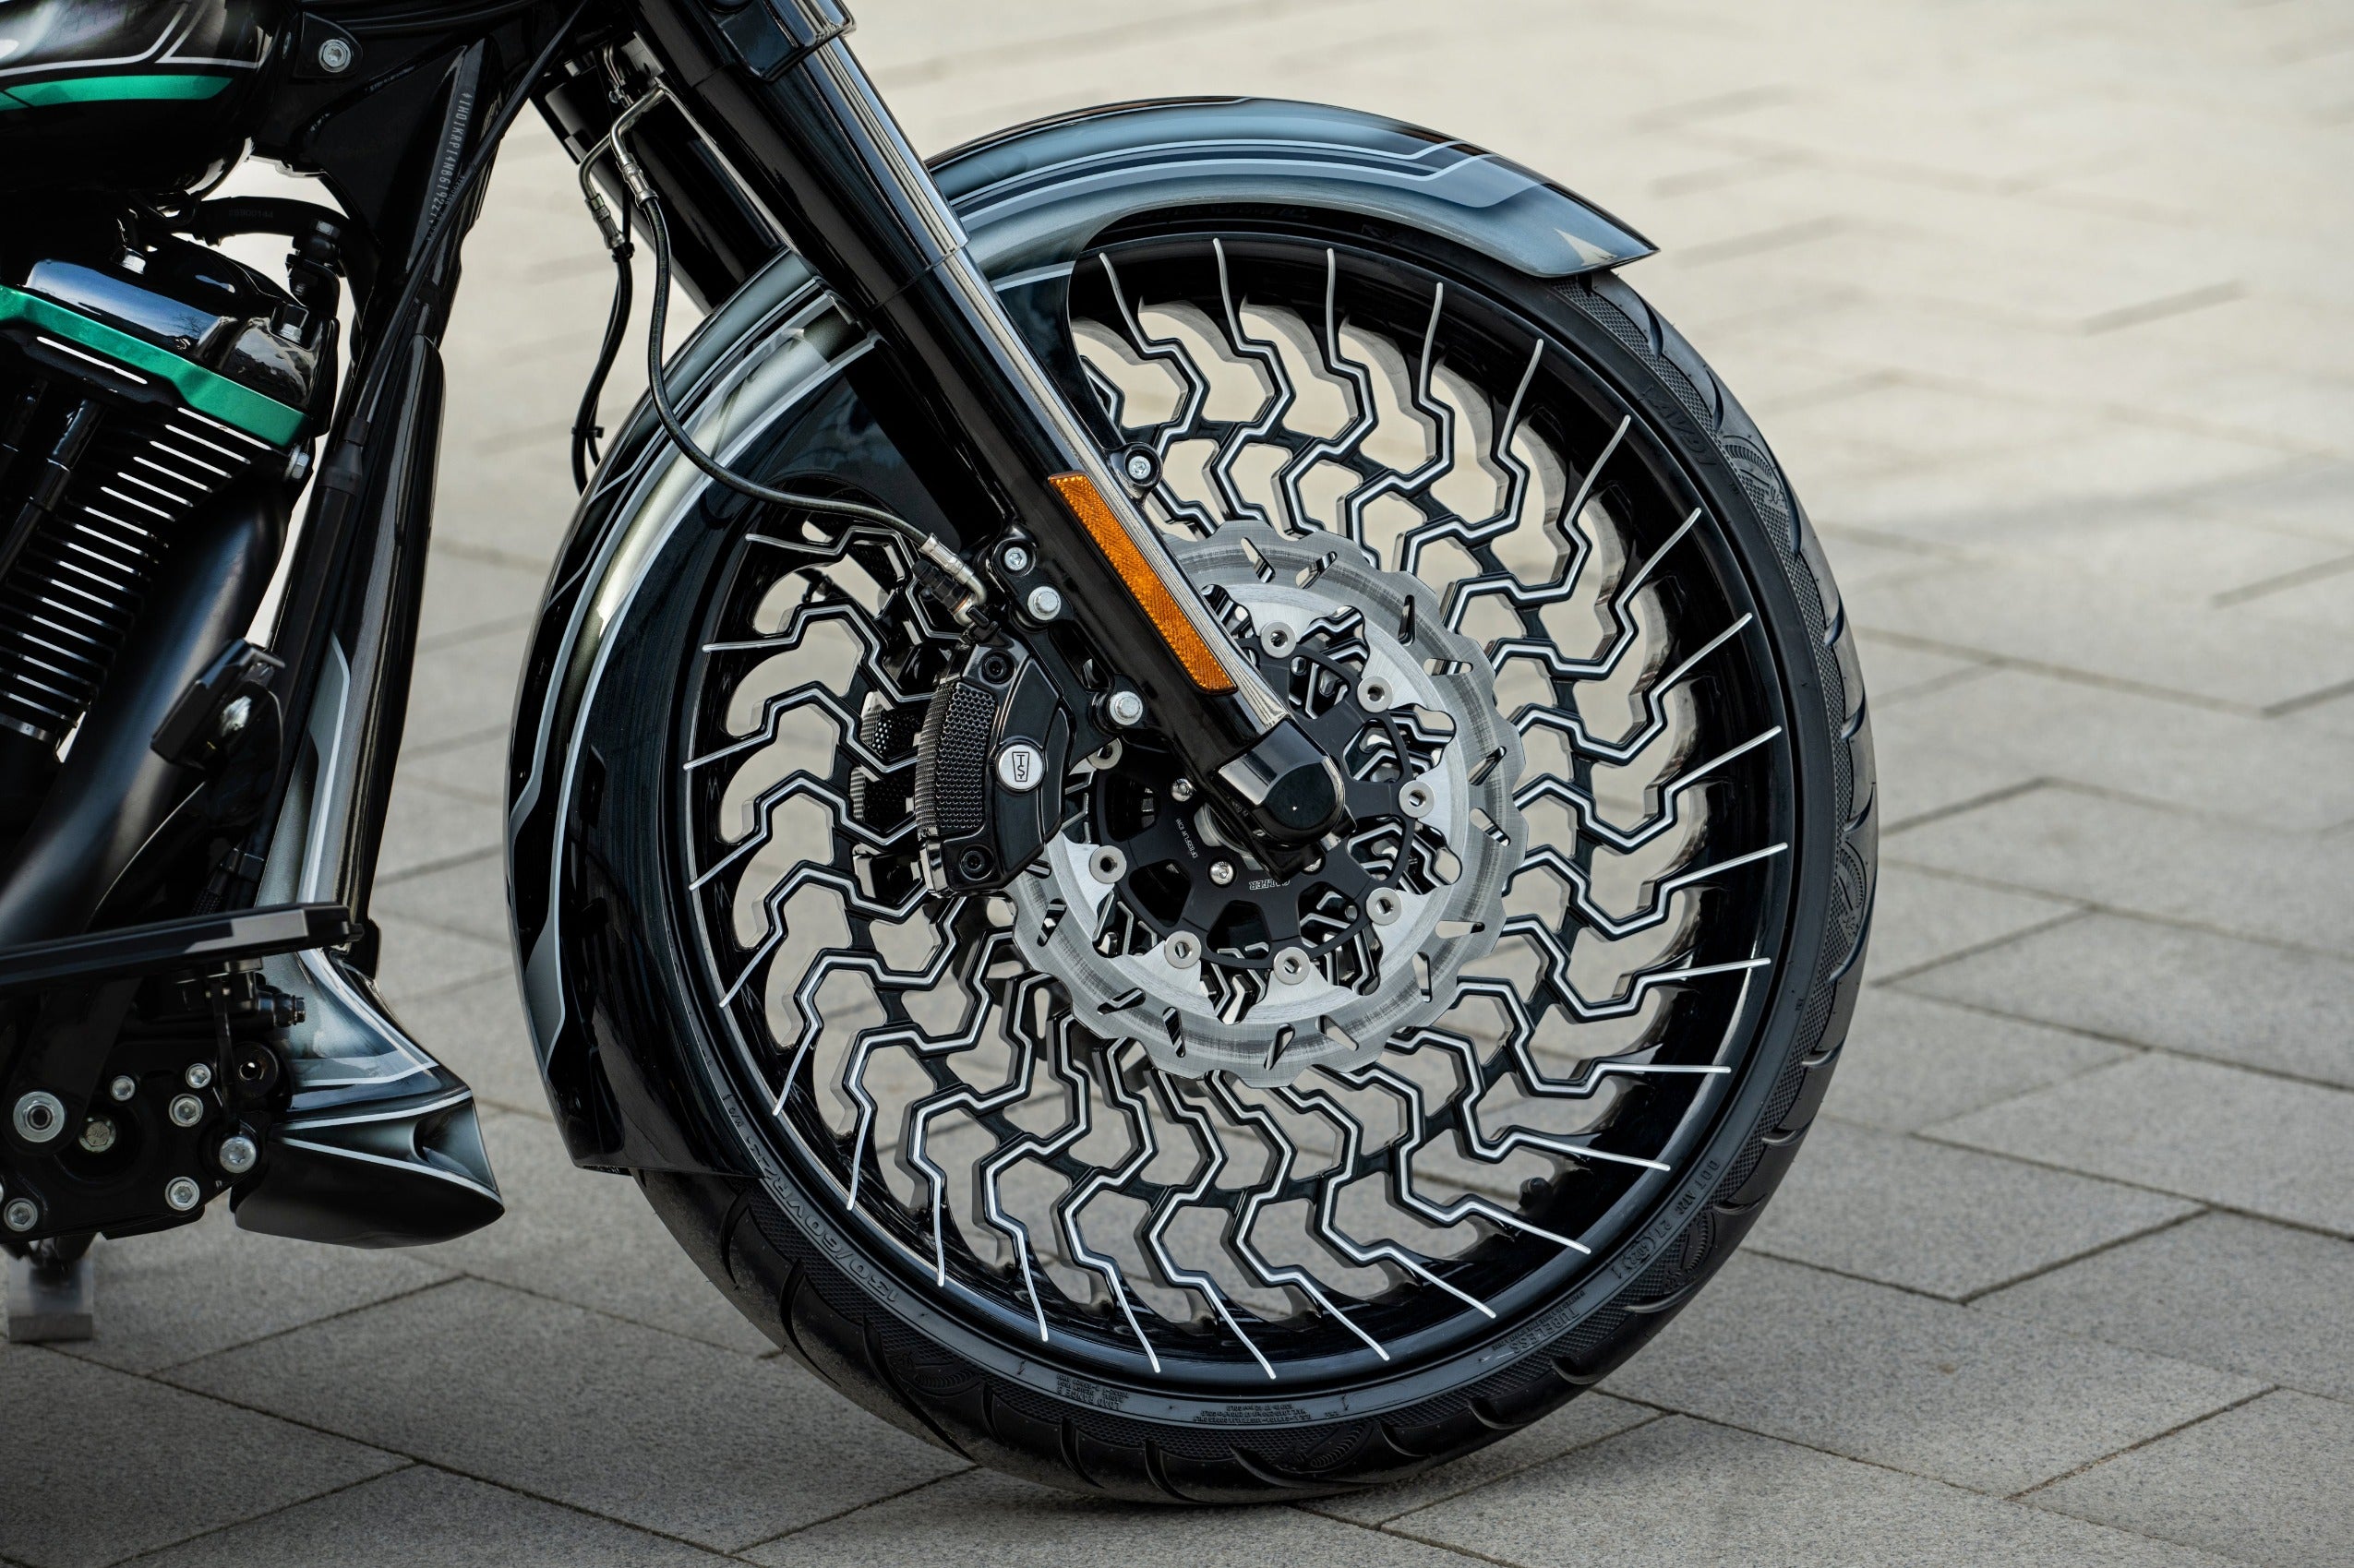 Tommy&Sons 23"x3,75" front wheel for harley davidson Touring render detail